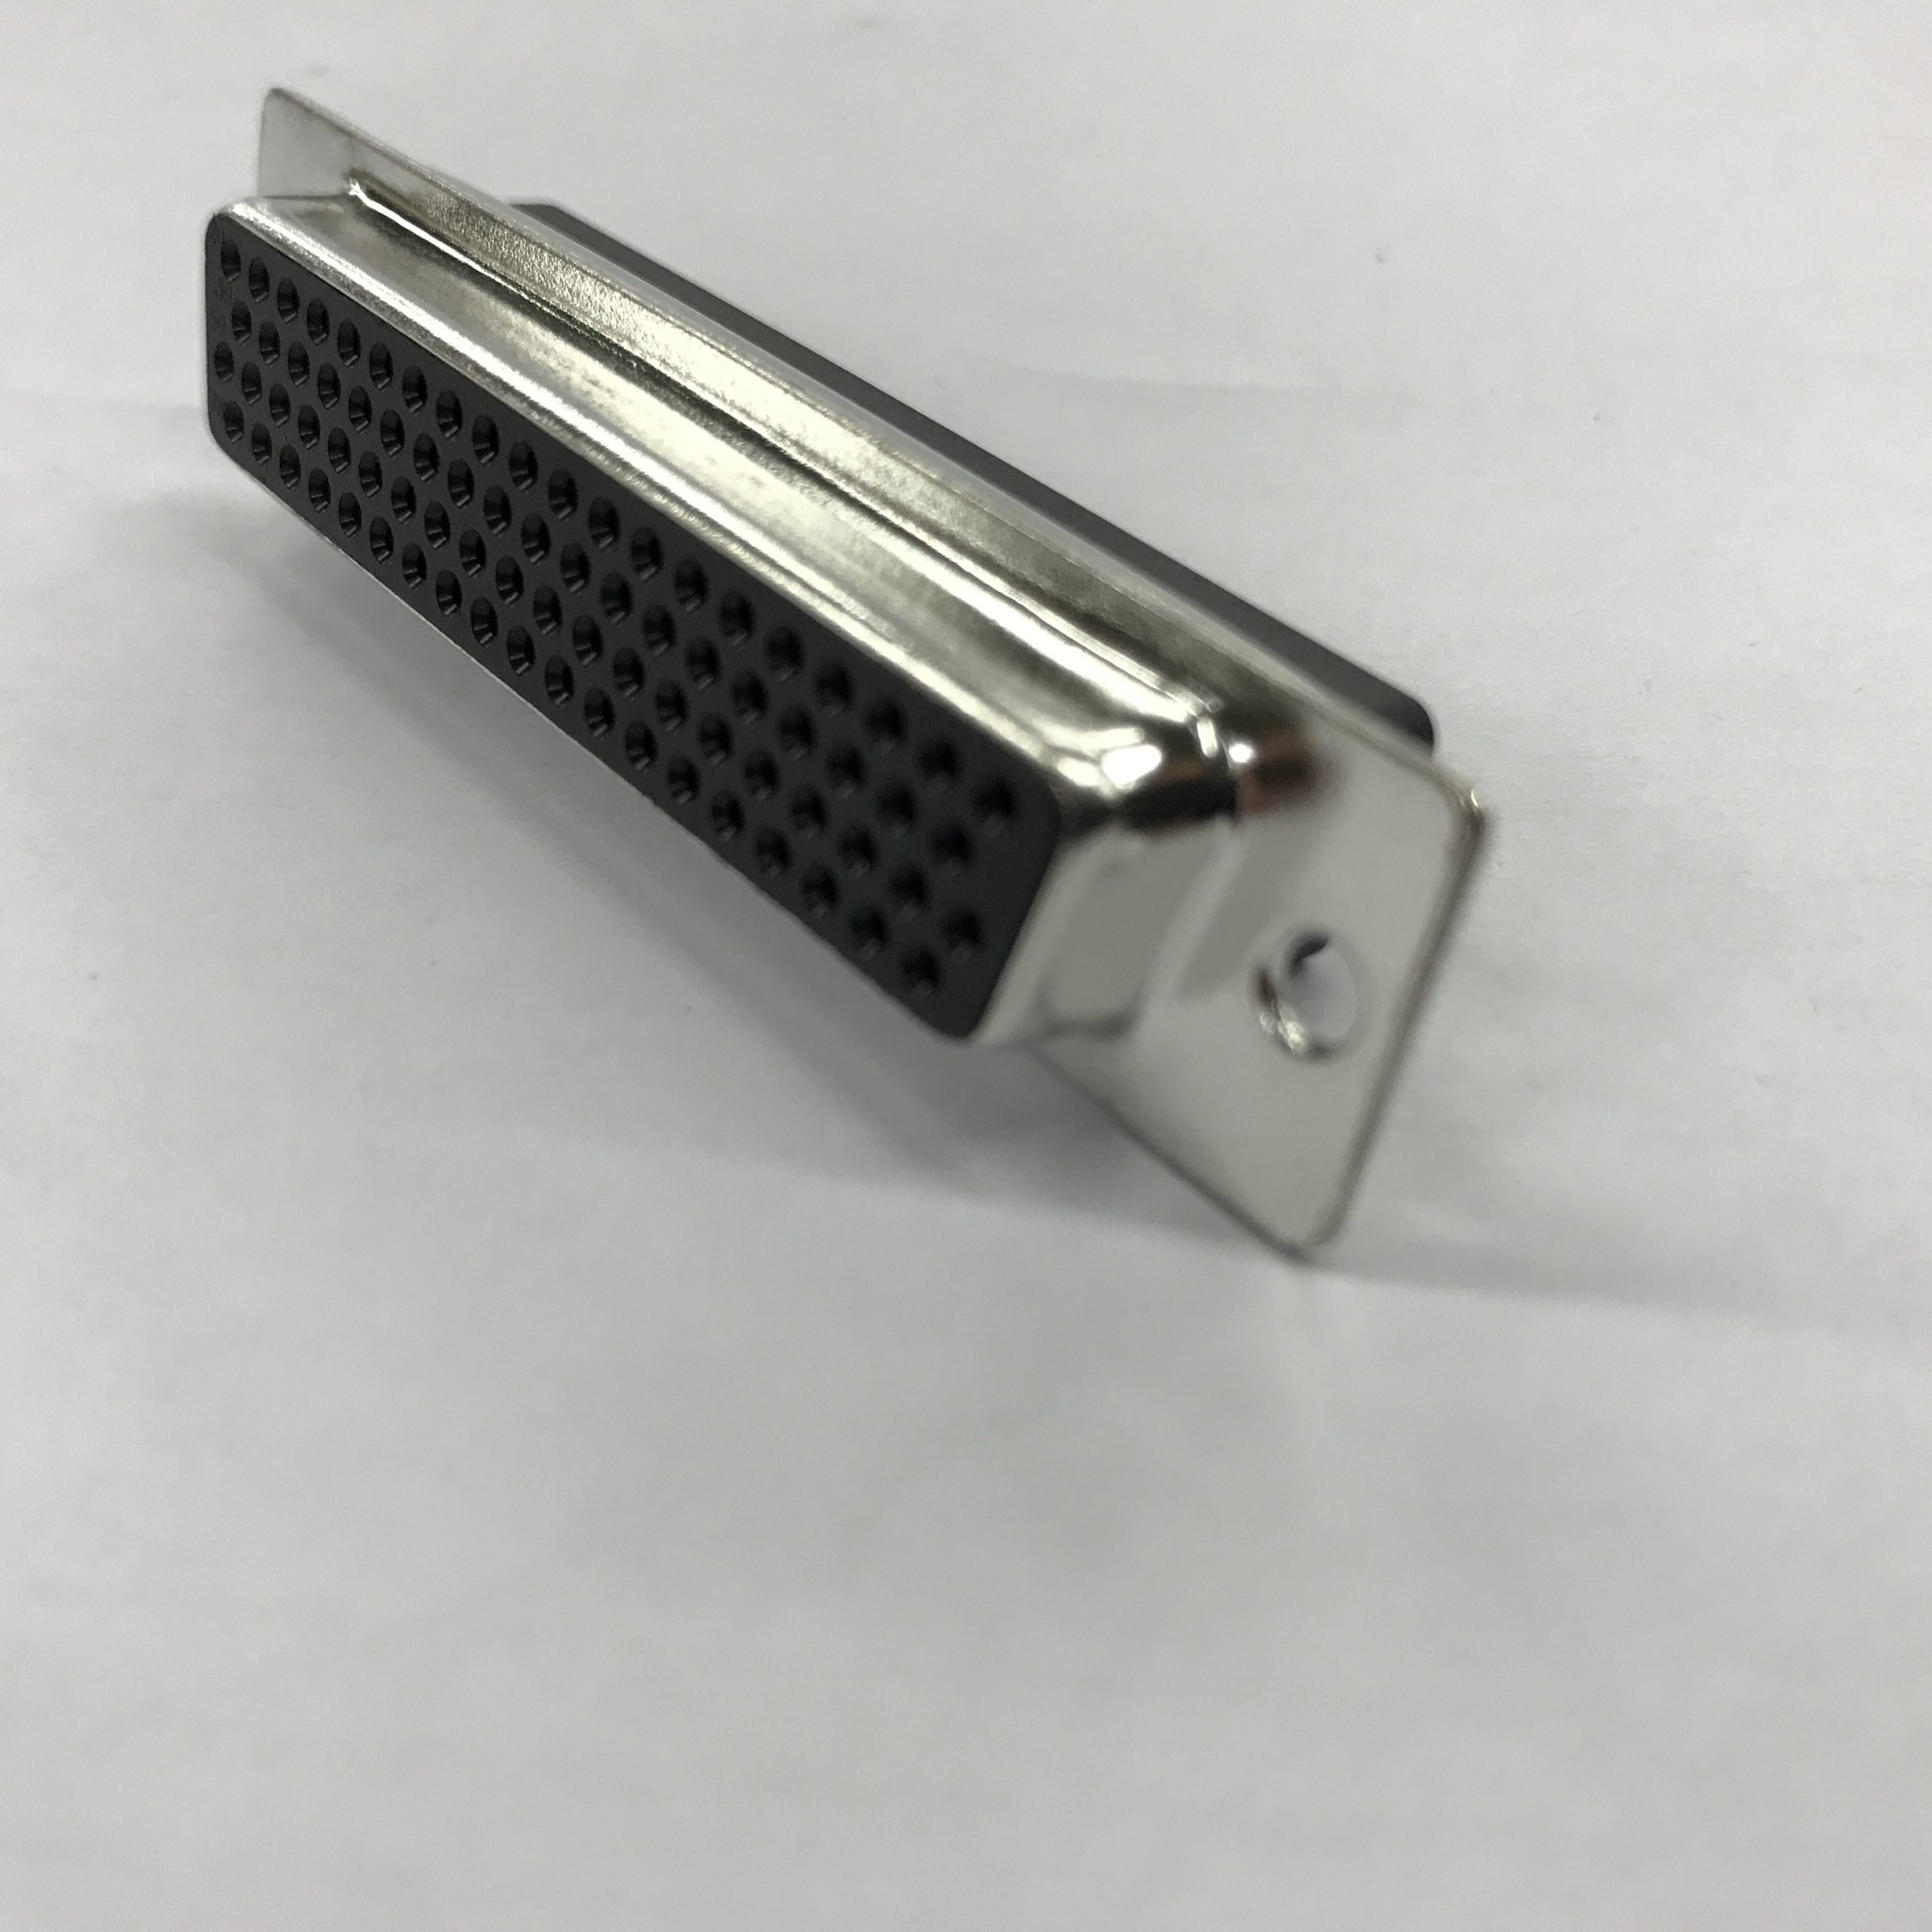 Dsub Connector, High Density, 78 Socket Contacts, Female